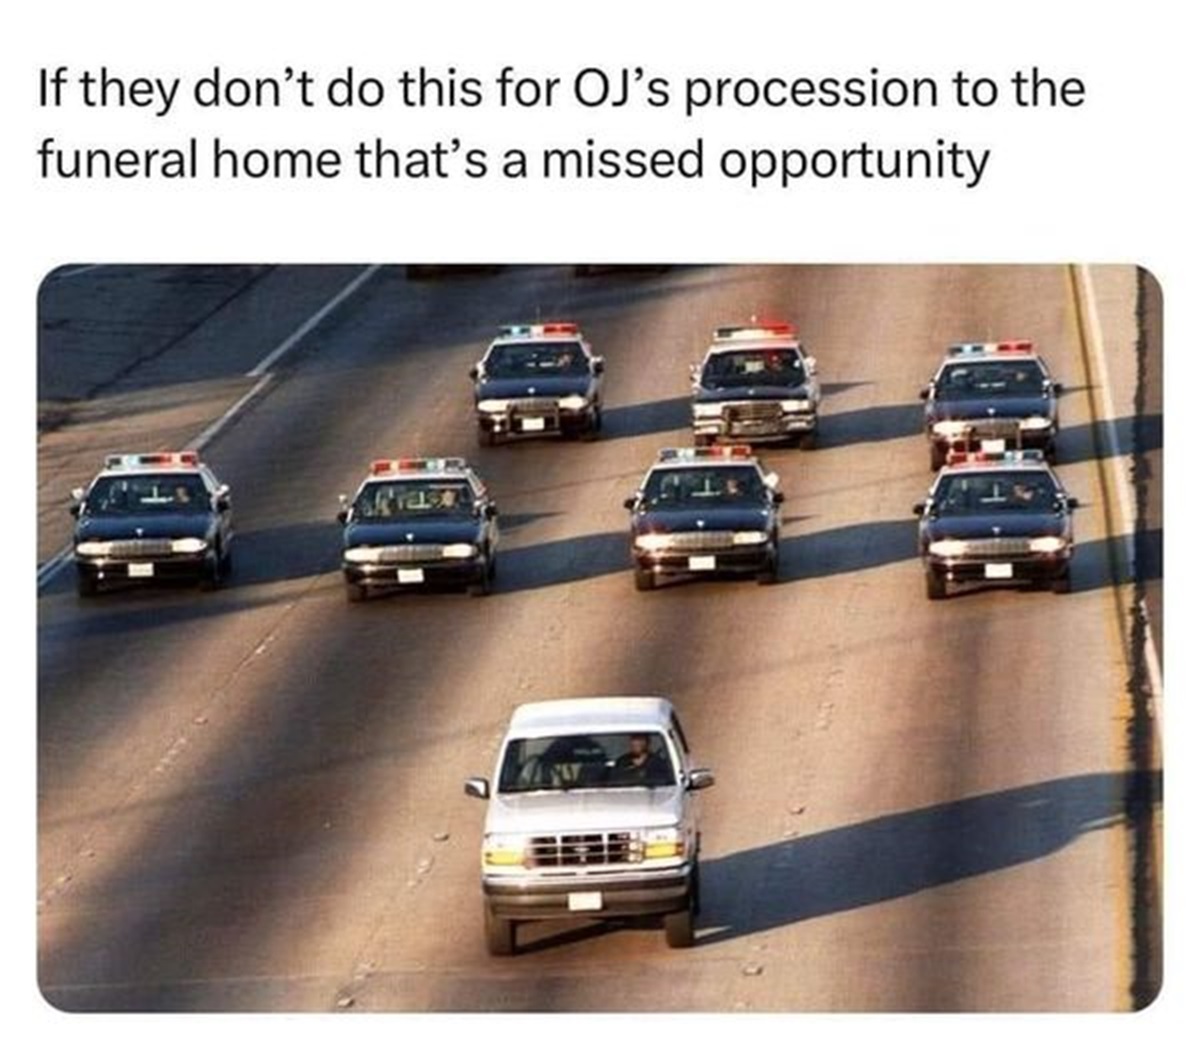 oj simpson car chase - If they don't do this for Oj's procession to the funeral home that's a missed opportunity